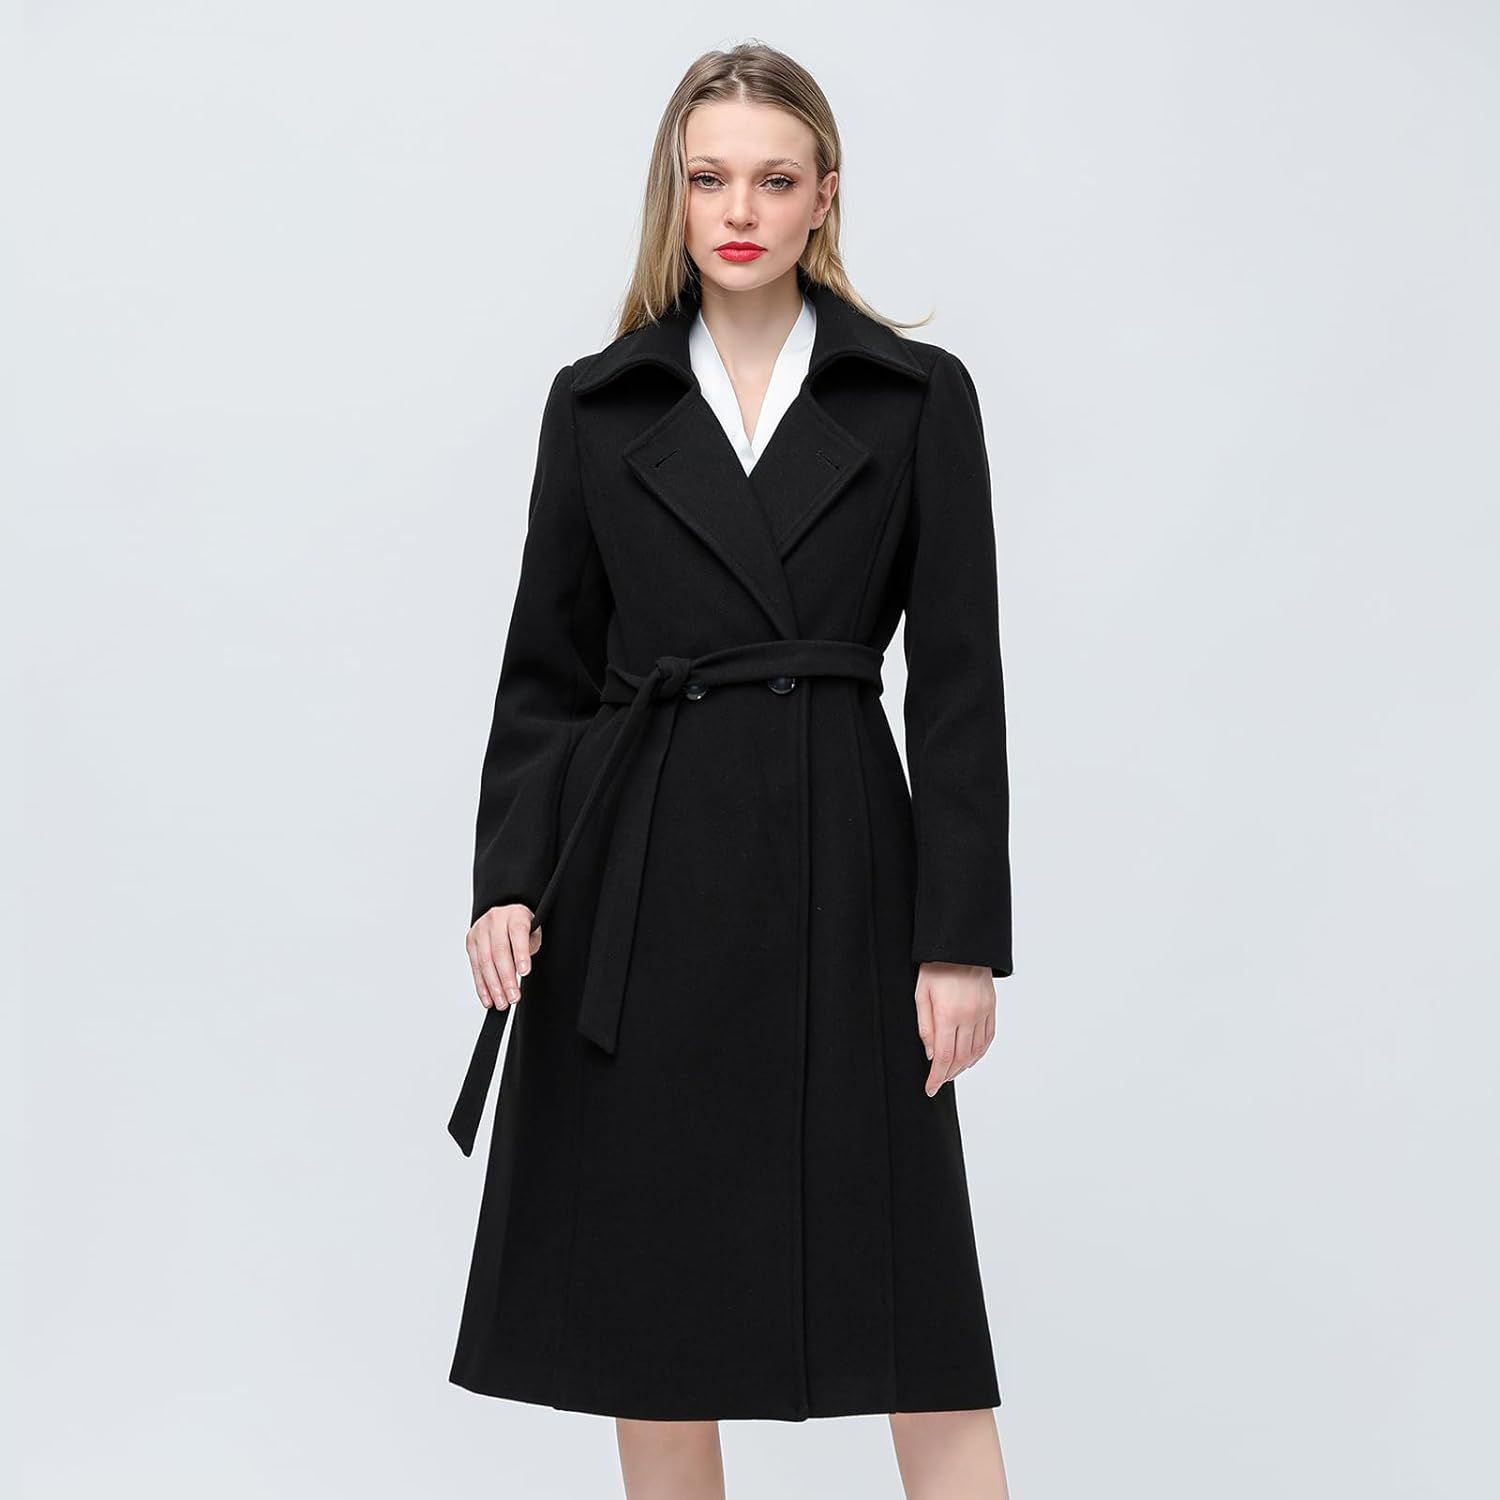 Aprsfn Women's Elegant Solid Color Mid-Length Thicken Warm Wool Blend Coat | Amazon (US)